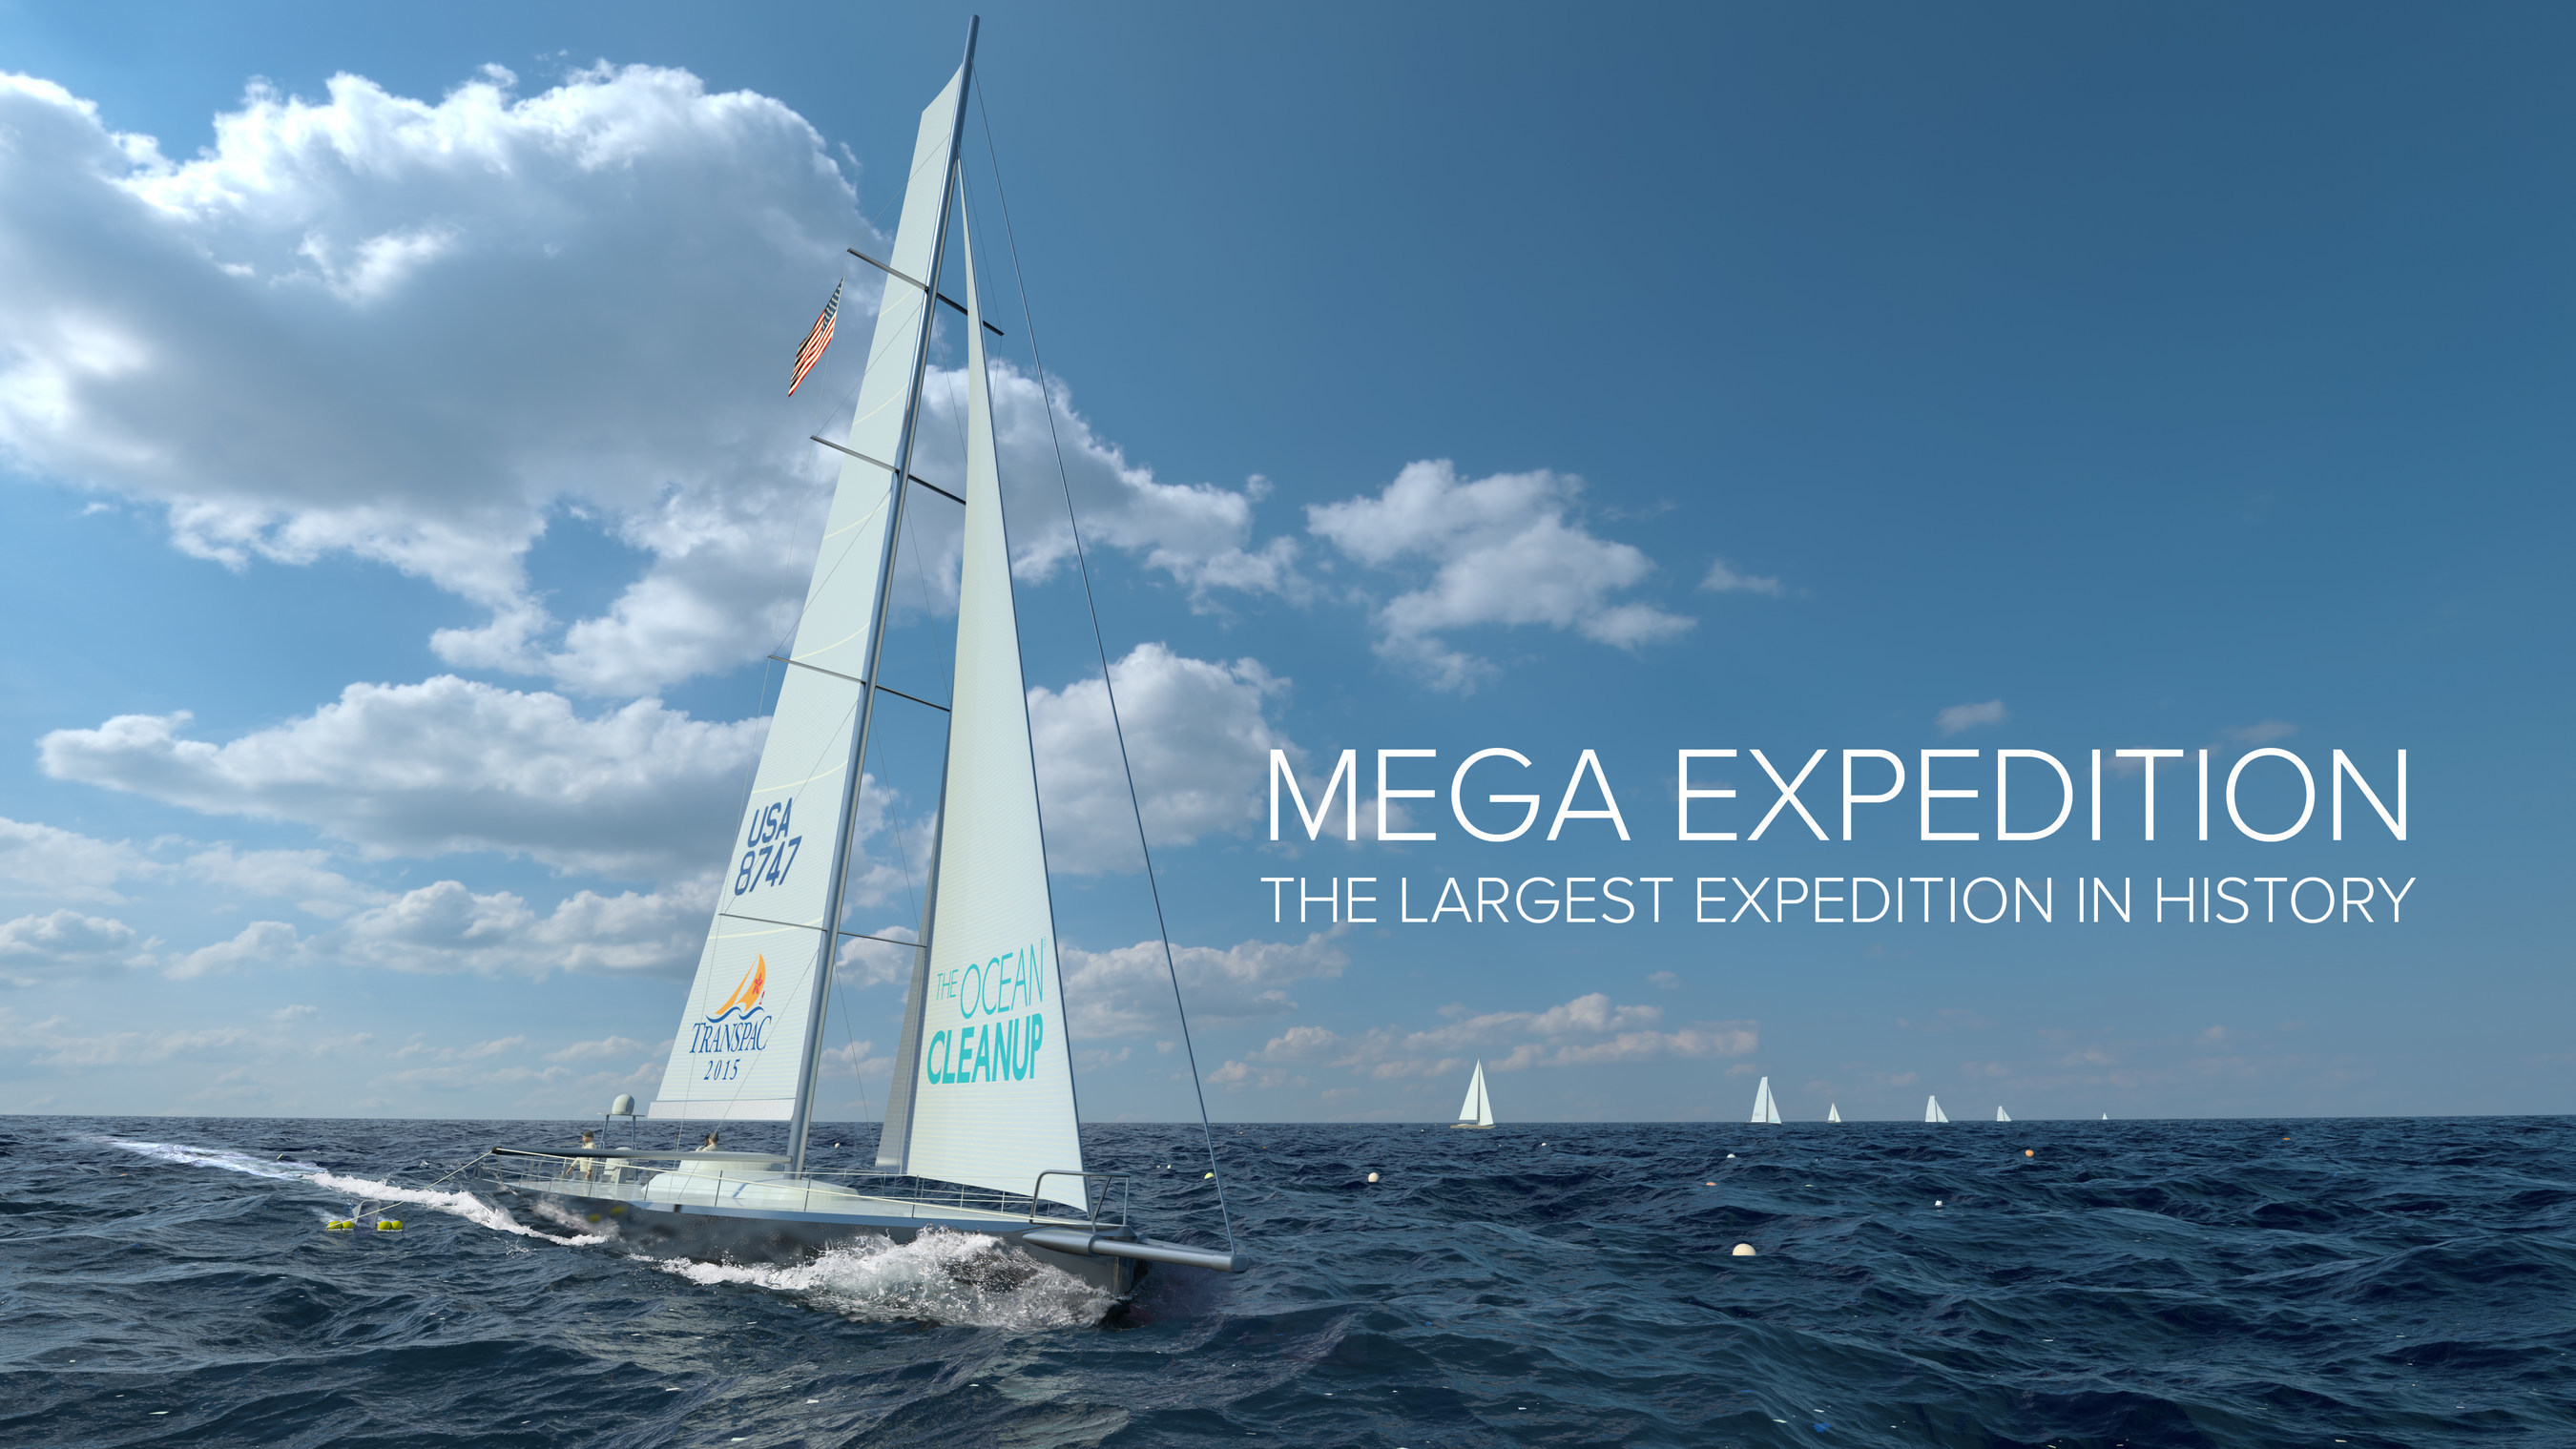 The Mega Expedition will take place in August 2015, in which up to 50 vessels will cover a 3,500,000 km? area between Hawaii and California in parallel, creating the first high-resolution map of plastic in the Pacific Ocean.